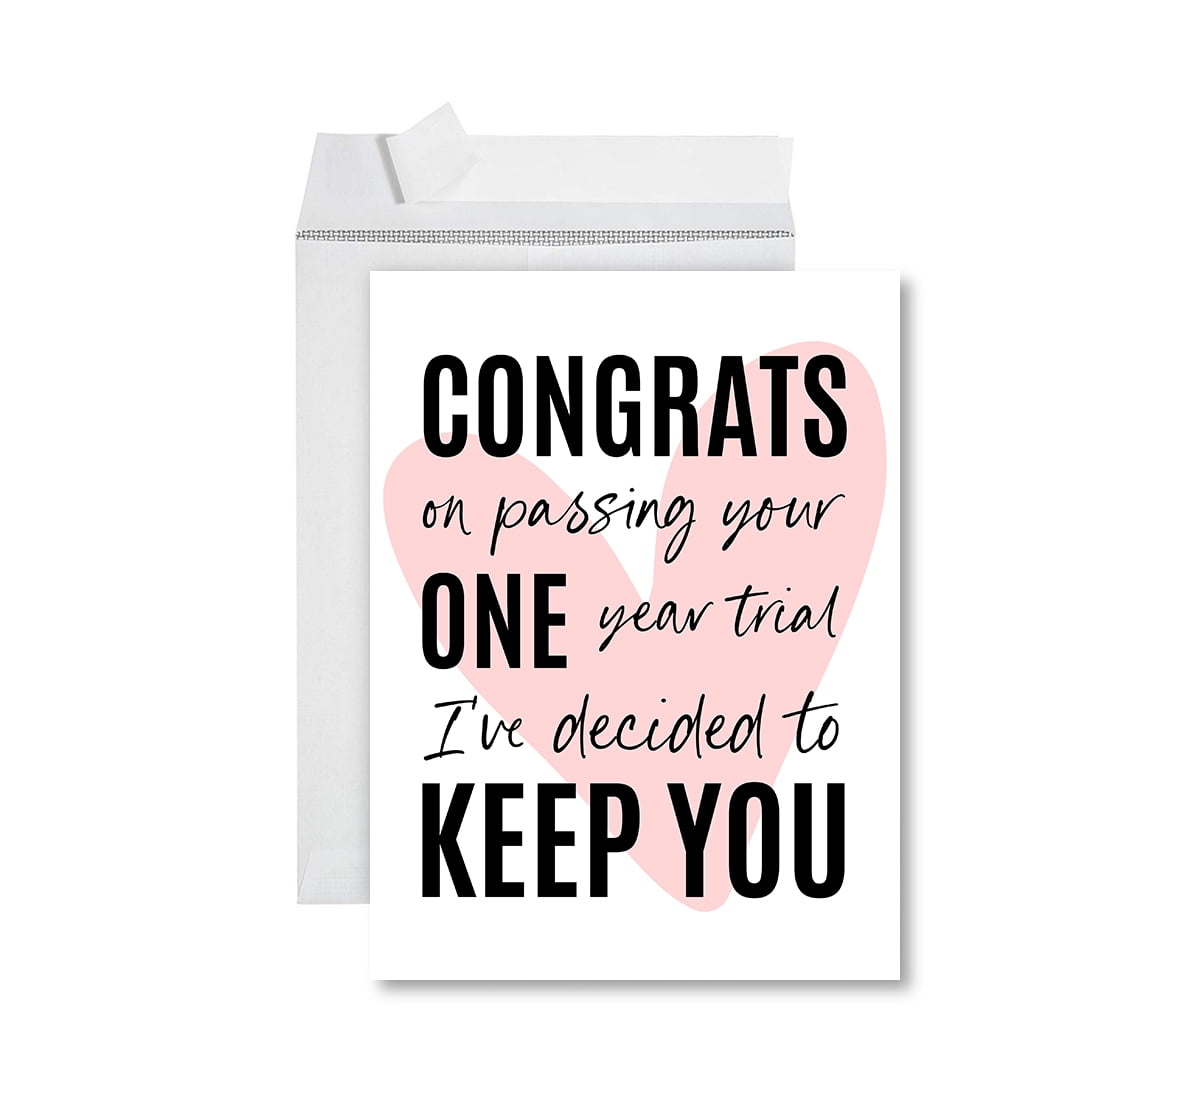 Large Size: 8.5 x 11 Inch with Envelope Jumbo Humorous Wedding Congratulations Greeting Card: Holy Matrimony with a Vintage-Looking Image of The Couple J6938WDG